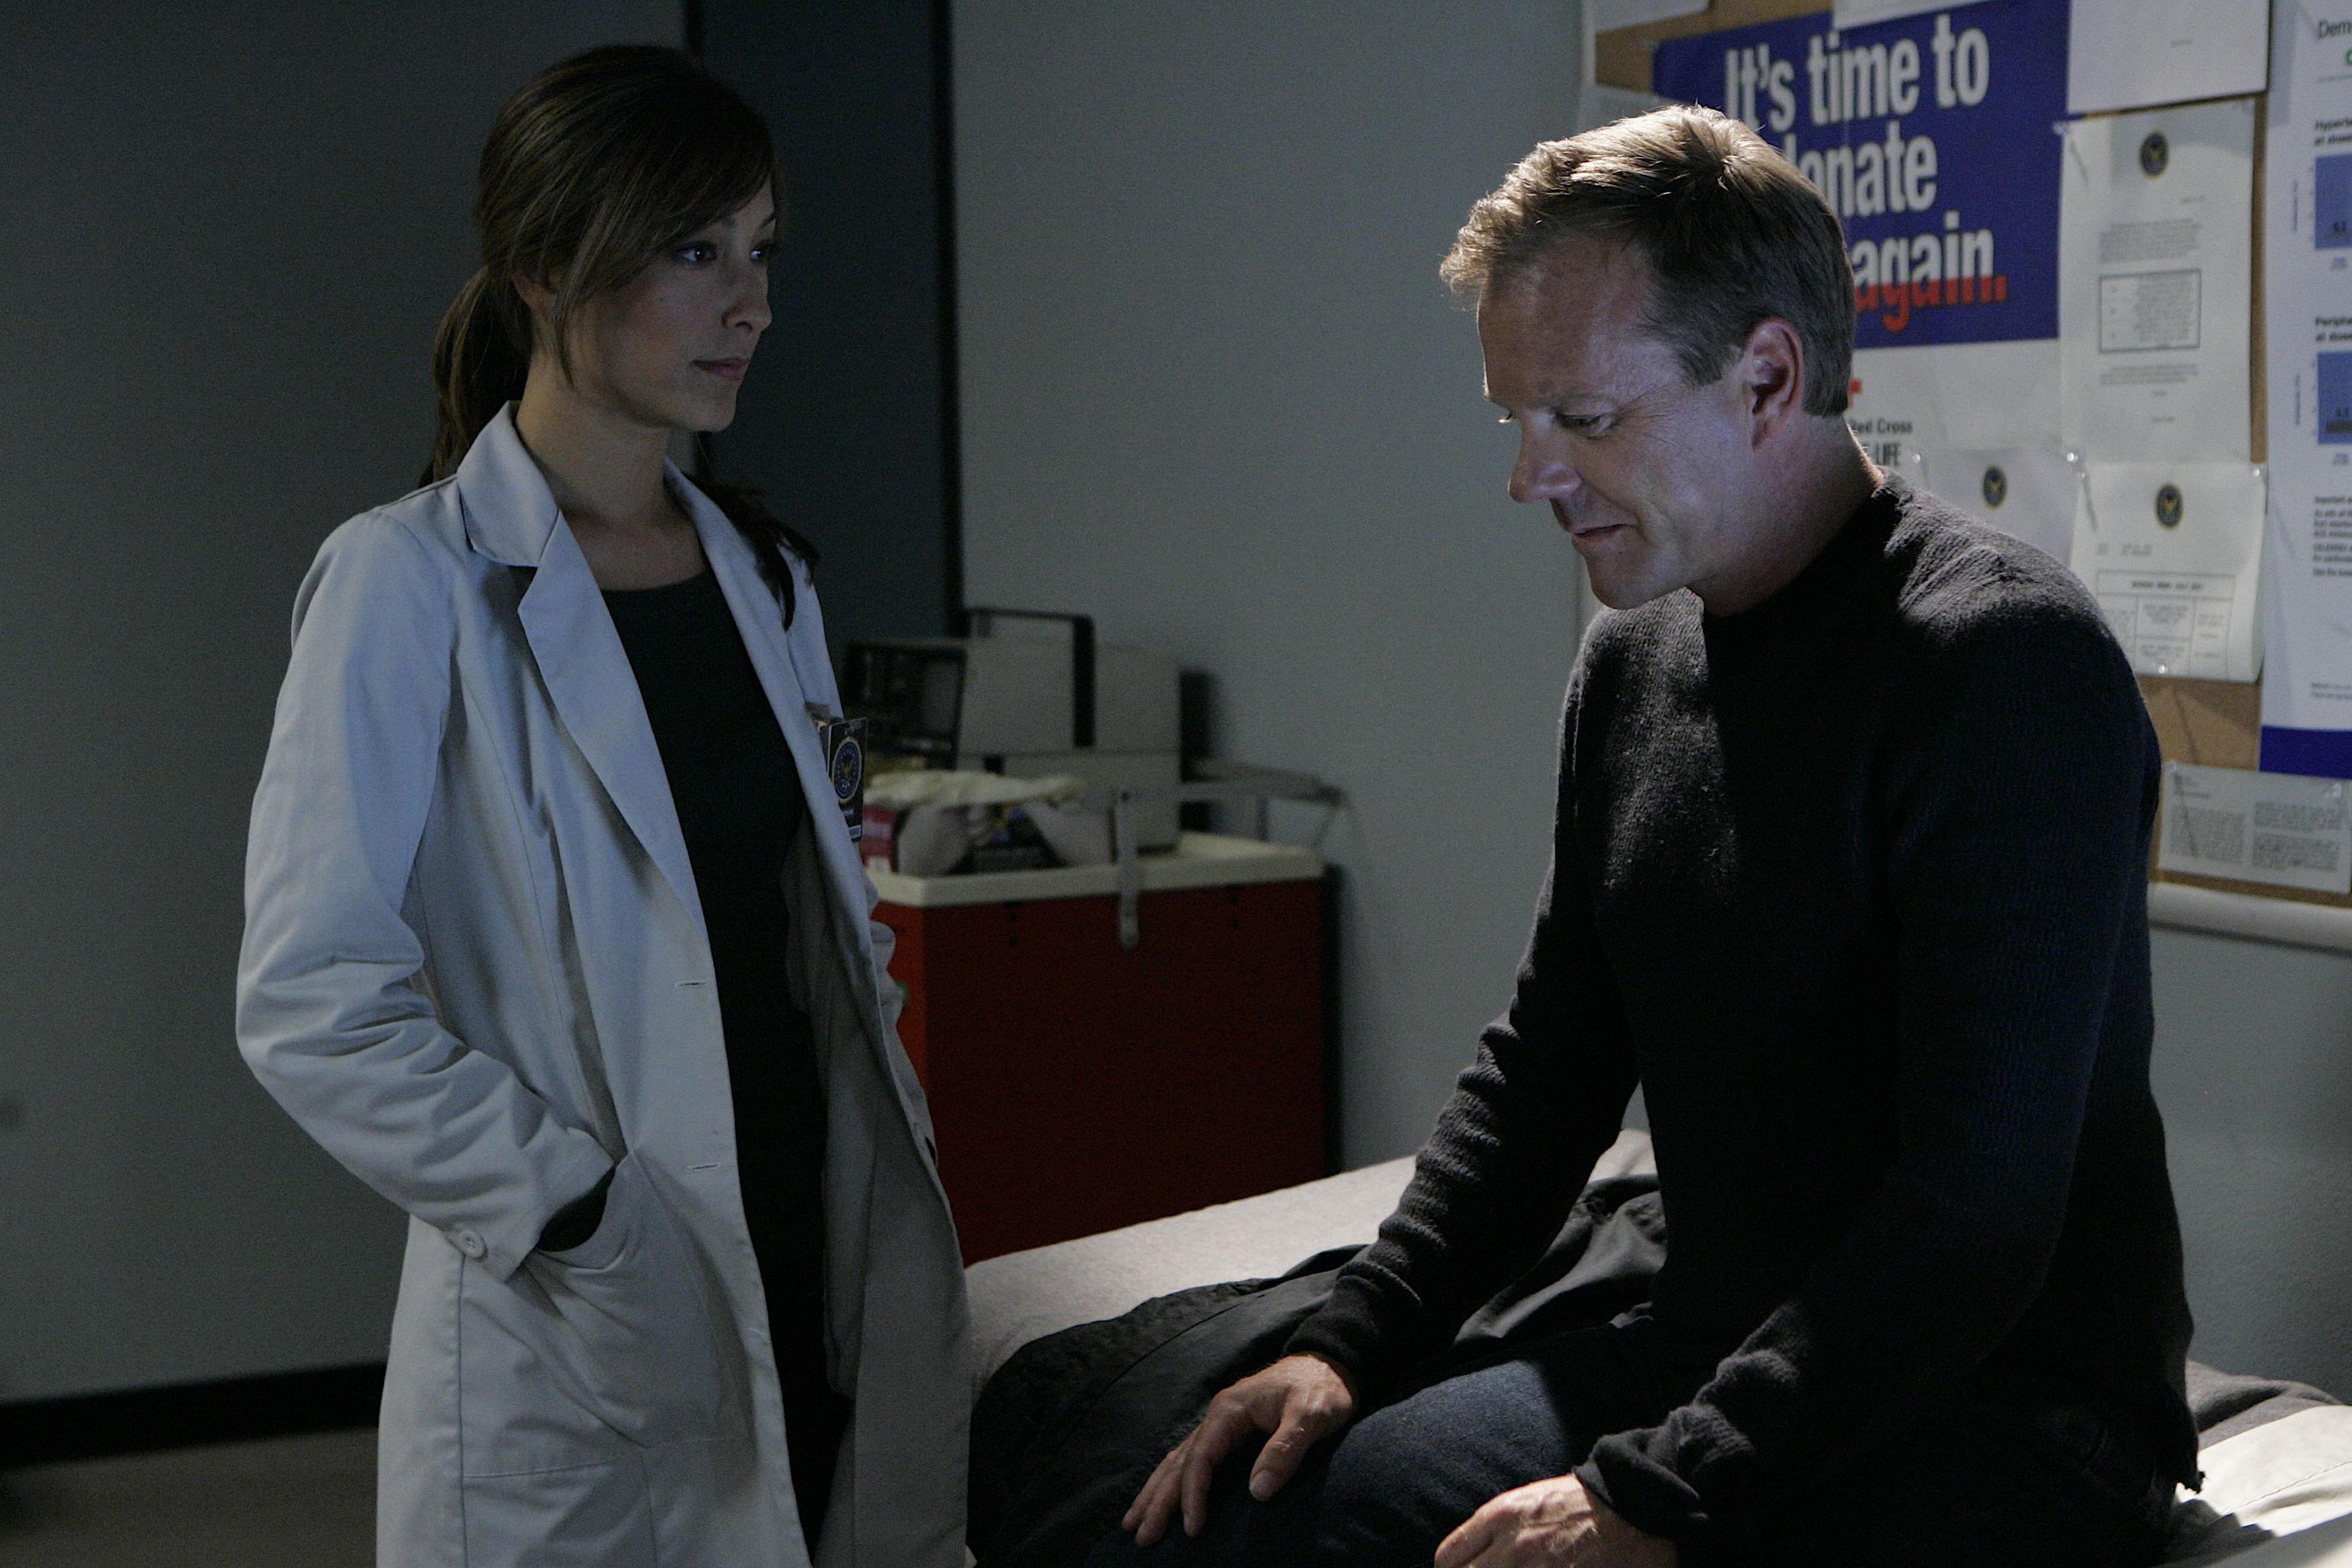 24, Day 7: 12:00am - 1:00am Christina Chang as Dr. Sunny Macer and Kiefer Sutherland as Jack Bauer